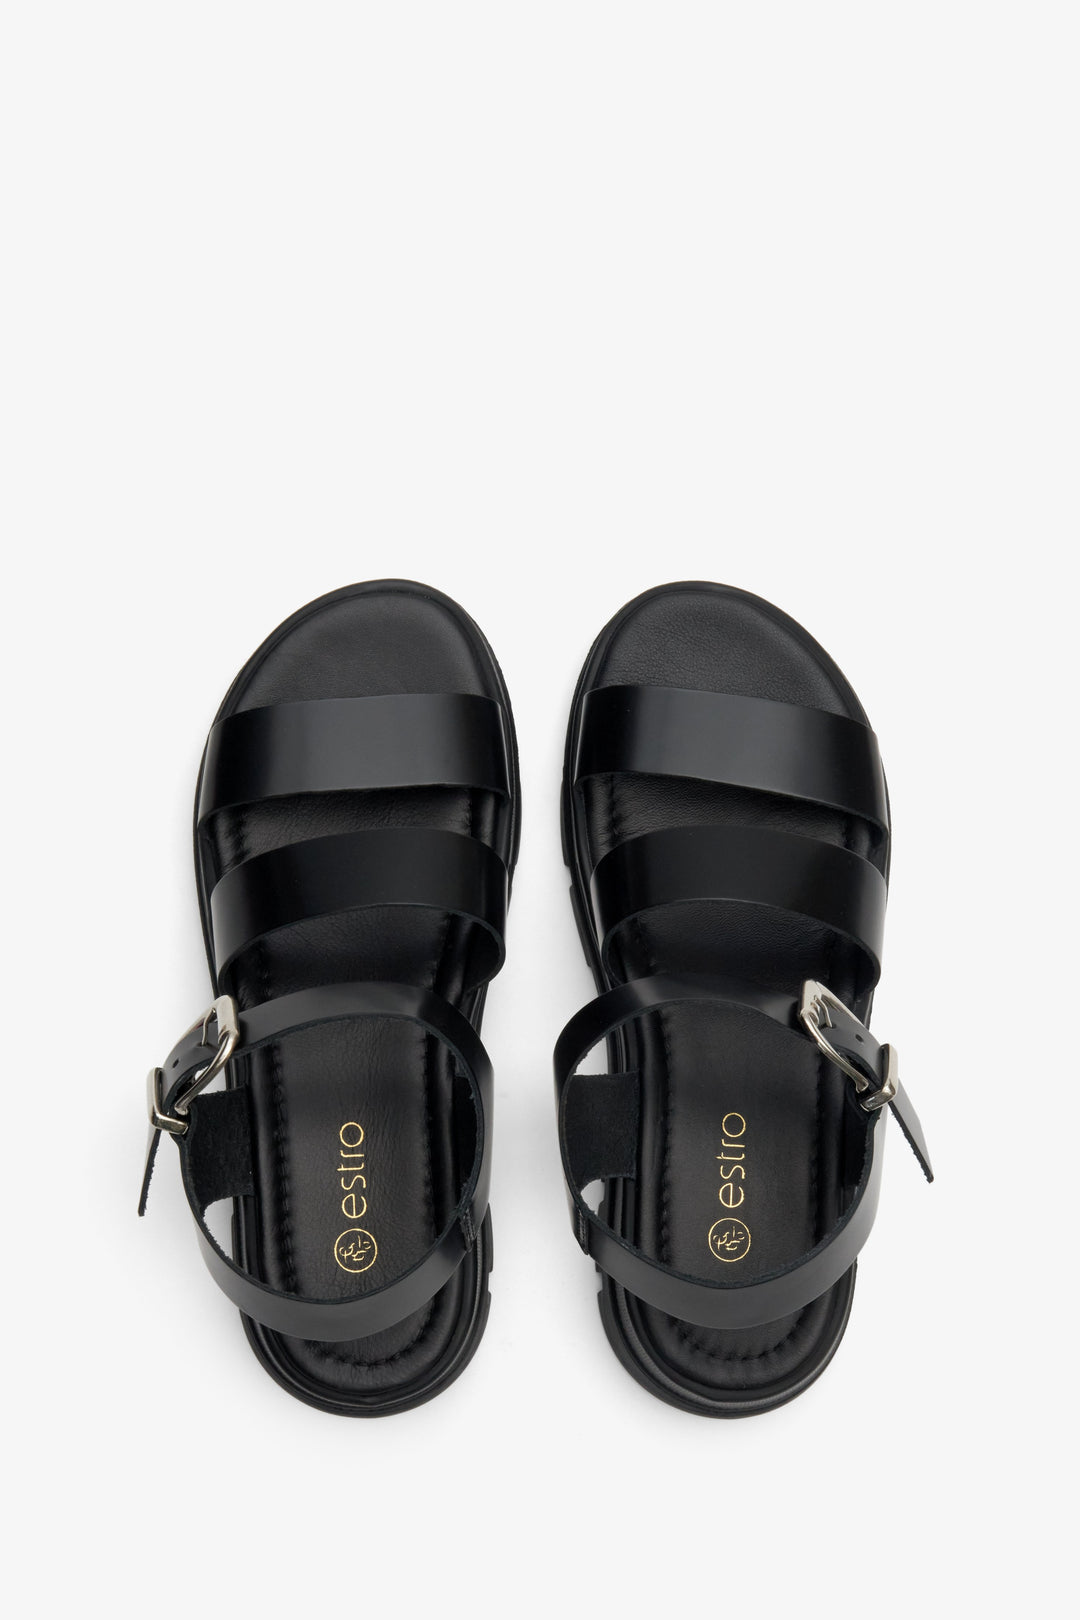 Women's sandals in black in natural leather Estro - presentation of footwear from above.